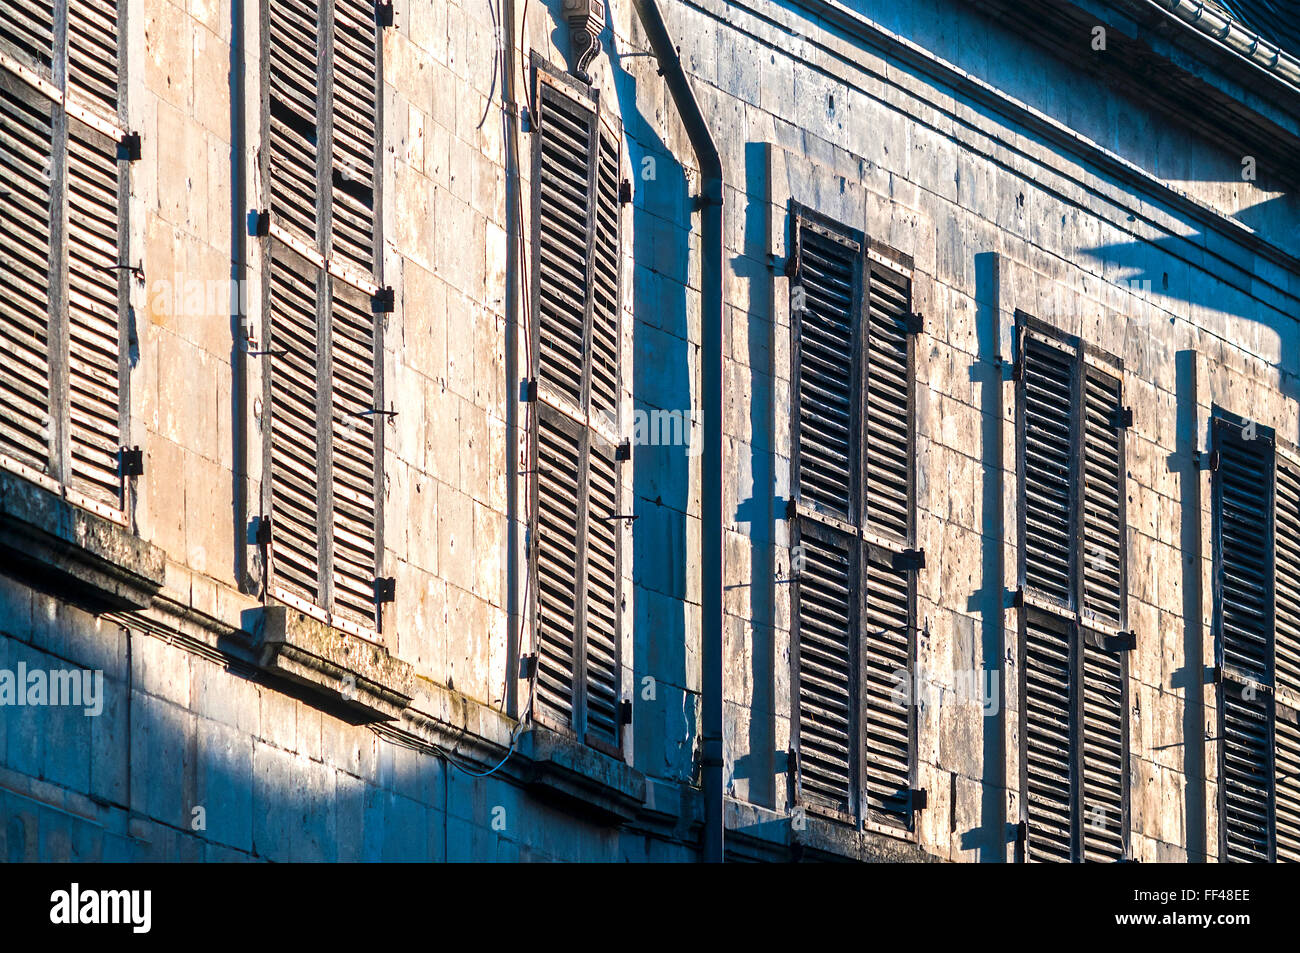 Traditional old wooden window shutters - France. Stock Photo